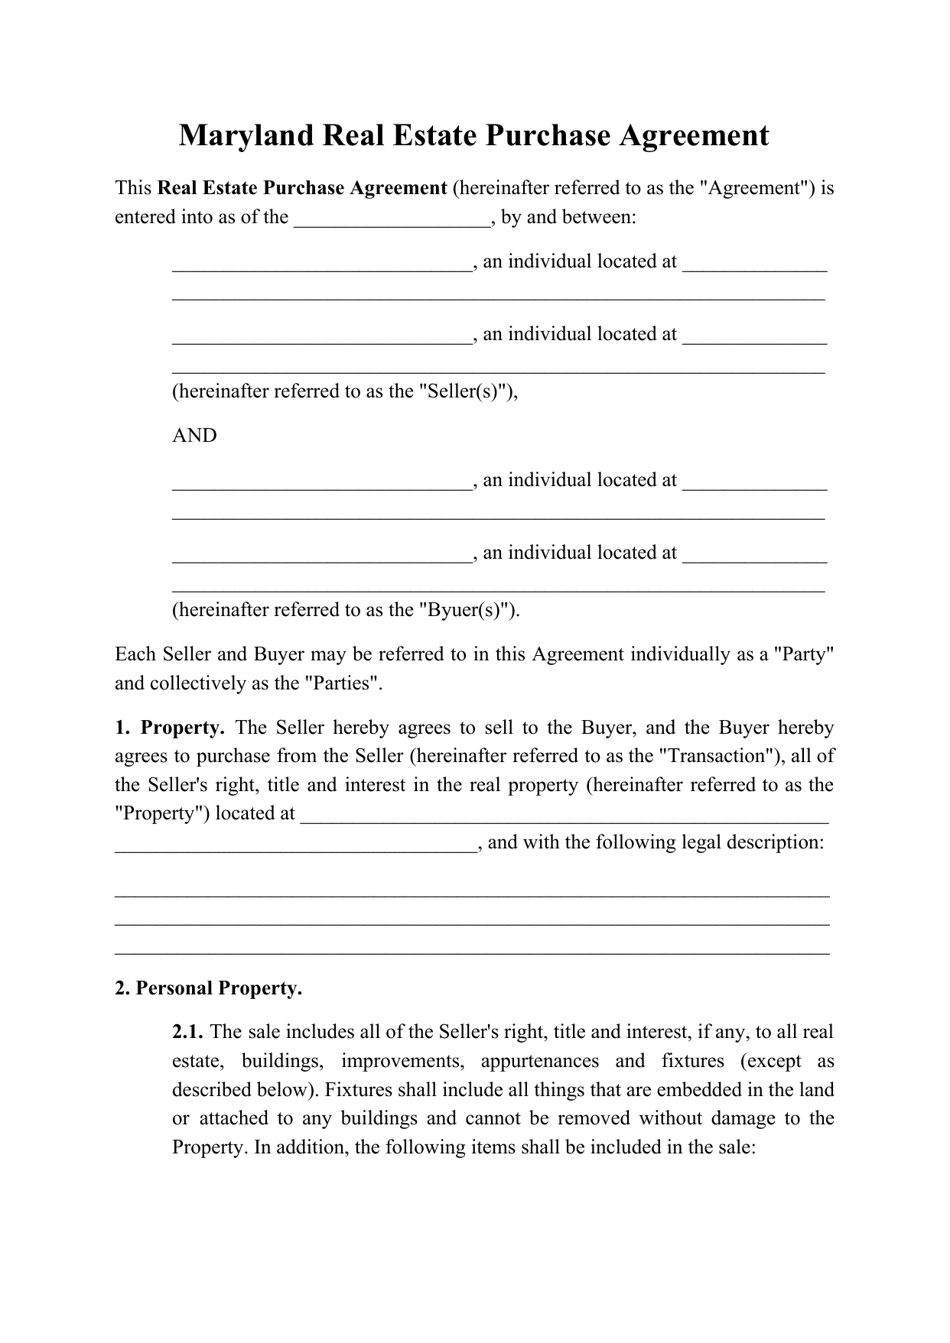 Real Estate Purchase Agreement Template - Maryland, Page 1